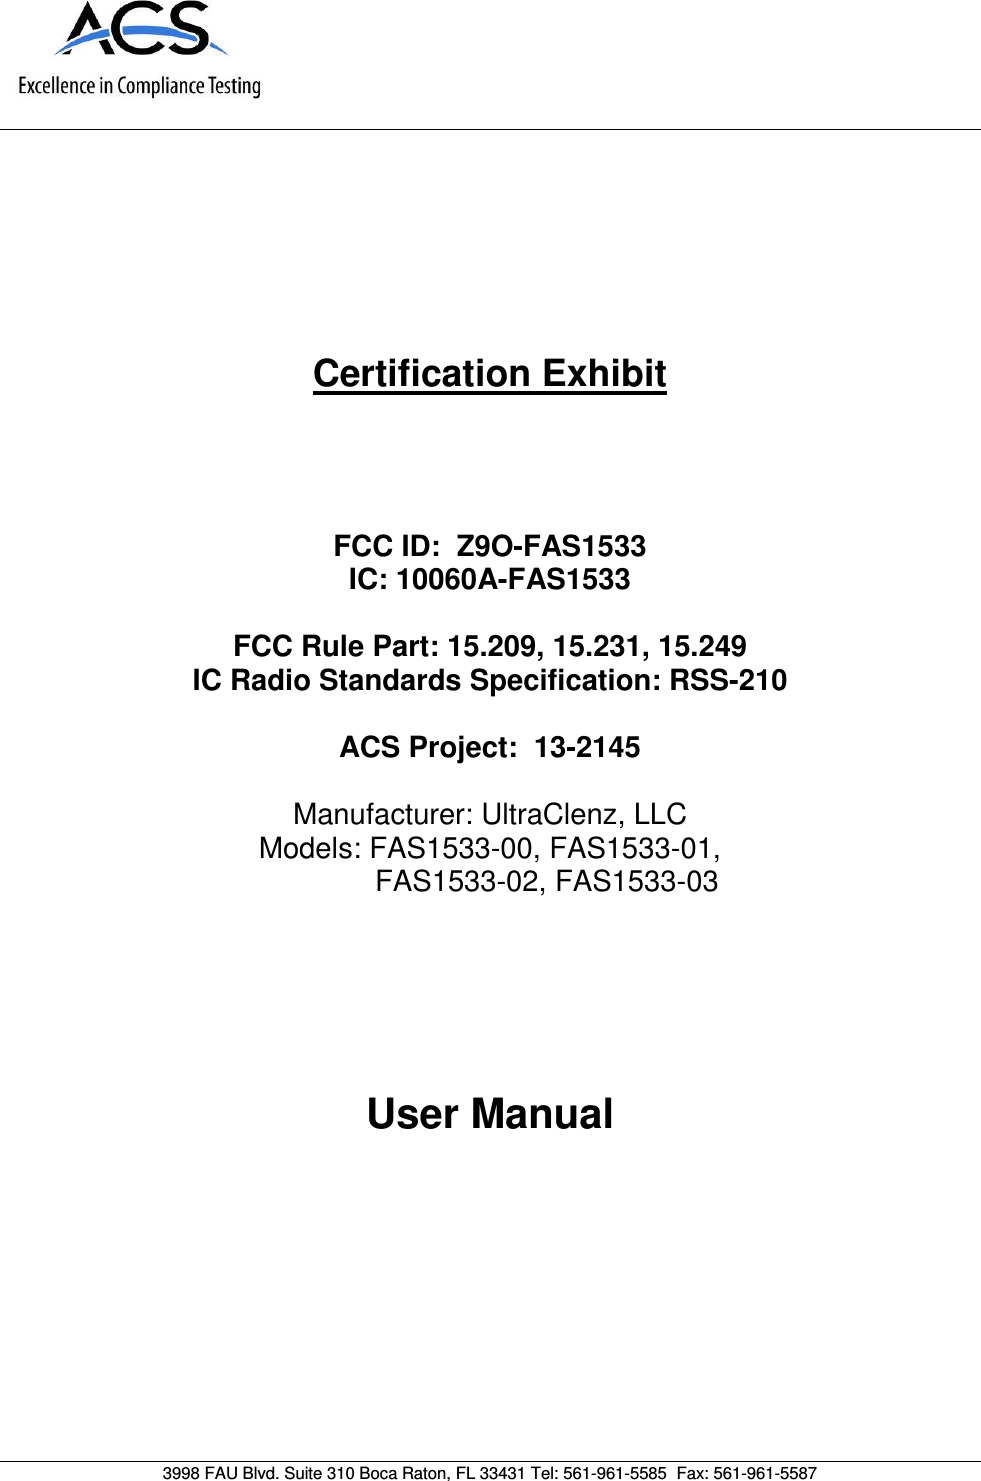      Certification Exhibit     FCC ID:  Z9O-FAS1533 IC: 10060A-FAS1533  FCC Rule Part: 15.209, 15.231, 15.249 IC Radio Standards Specification: RSS-210  ACS Project:  13-2145   Manufacturer: UltraClenz, LLC Models: FAS1533-00, FAS1533-01,                FAS1533-02, FAS1533-03     User Manual   3998 FAU Blvd. Suite 310 Boca Raton, FL 33431 Tel: 561-961-5585  Fax: 561-961-5587 